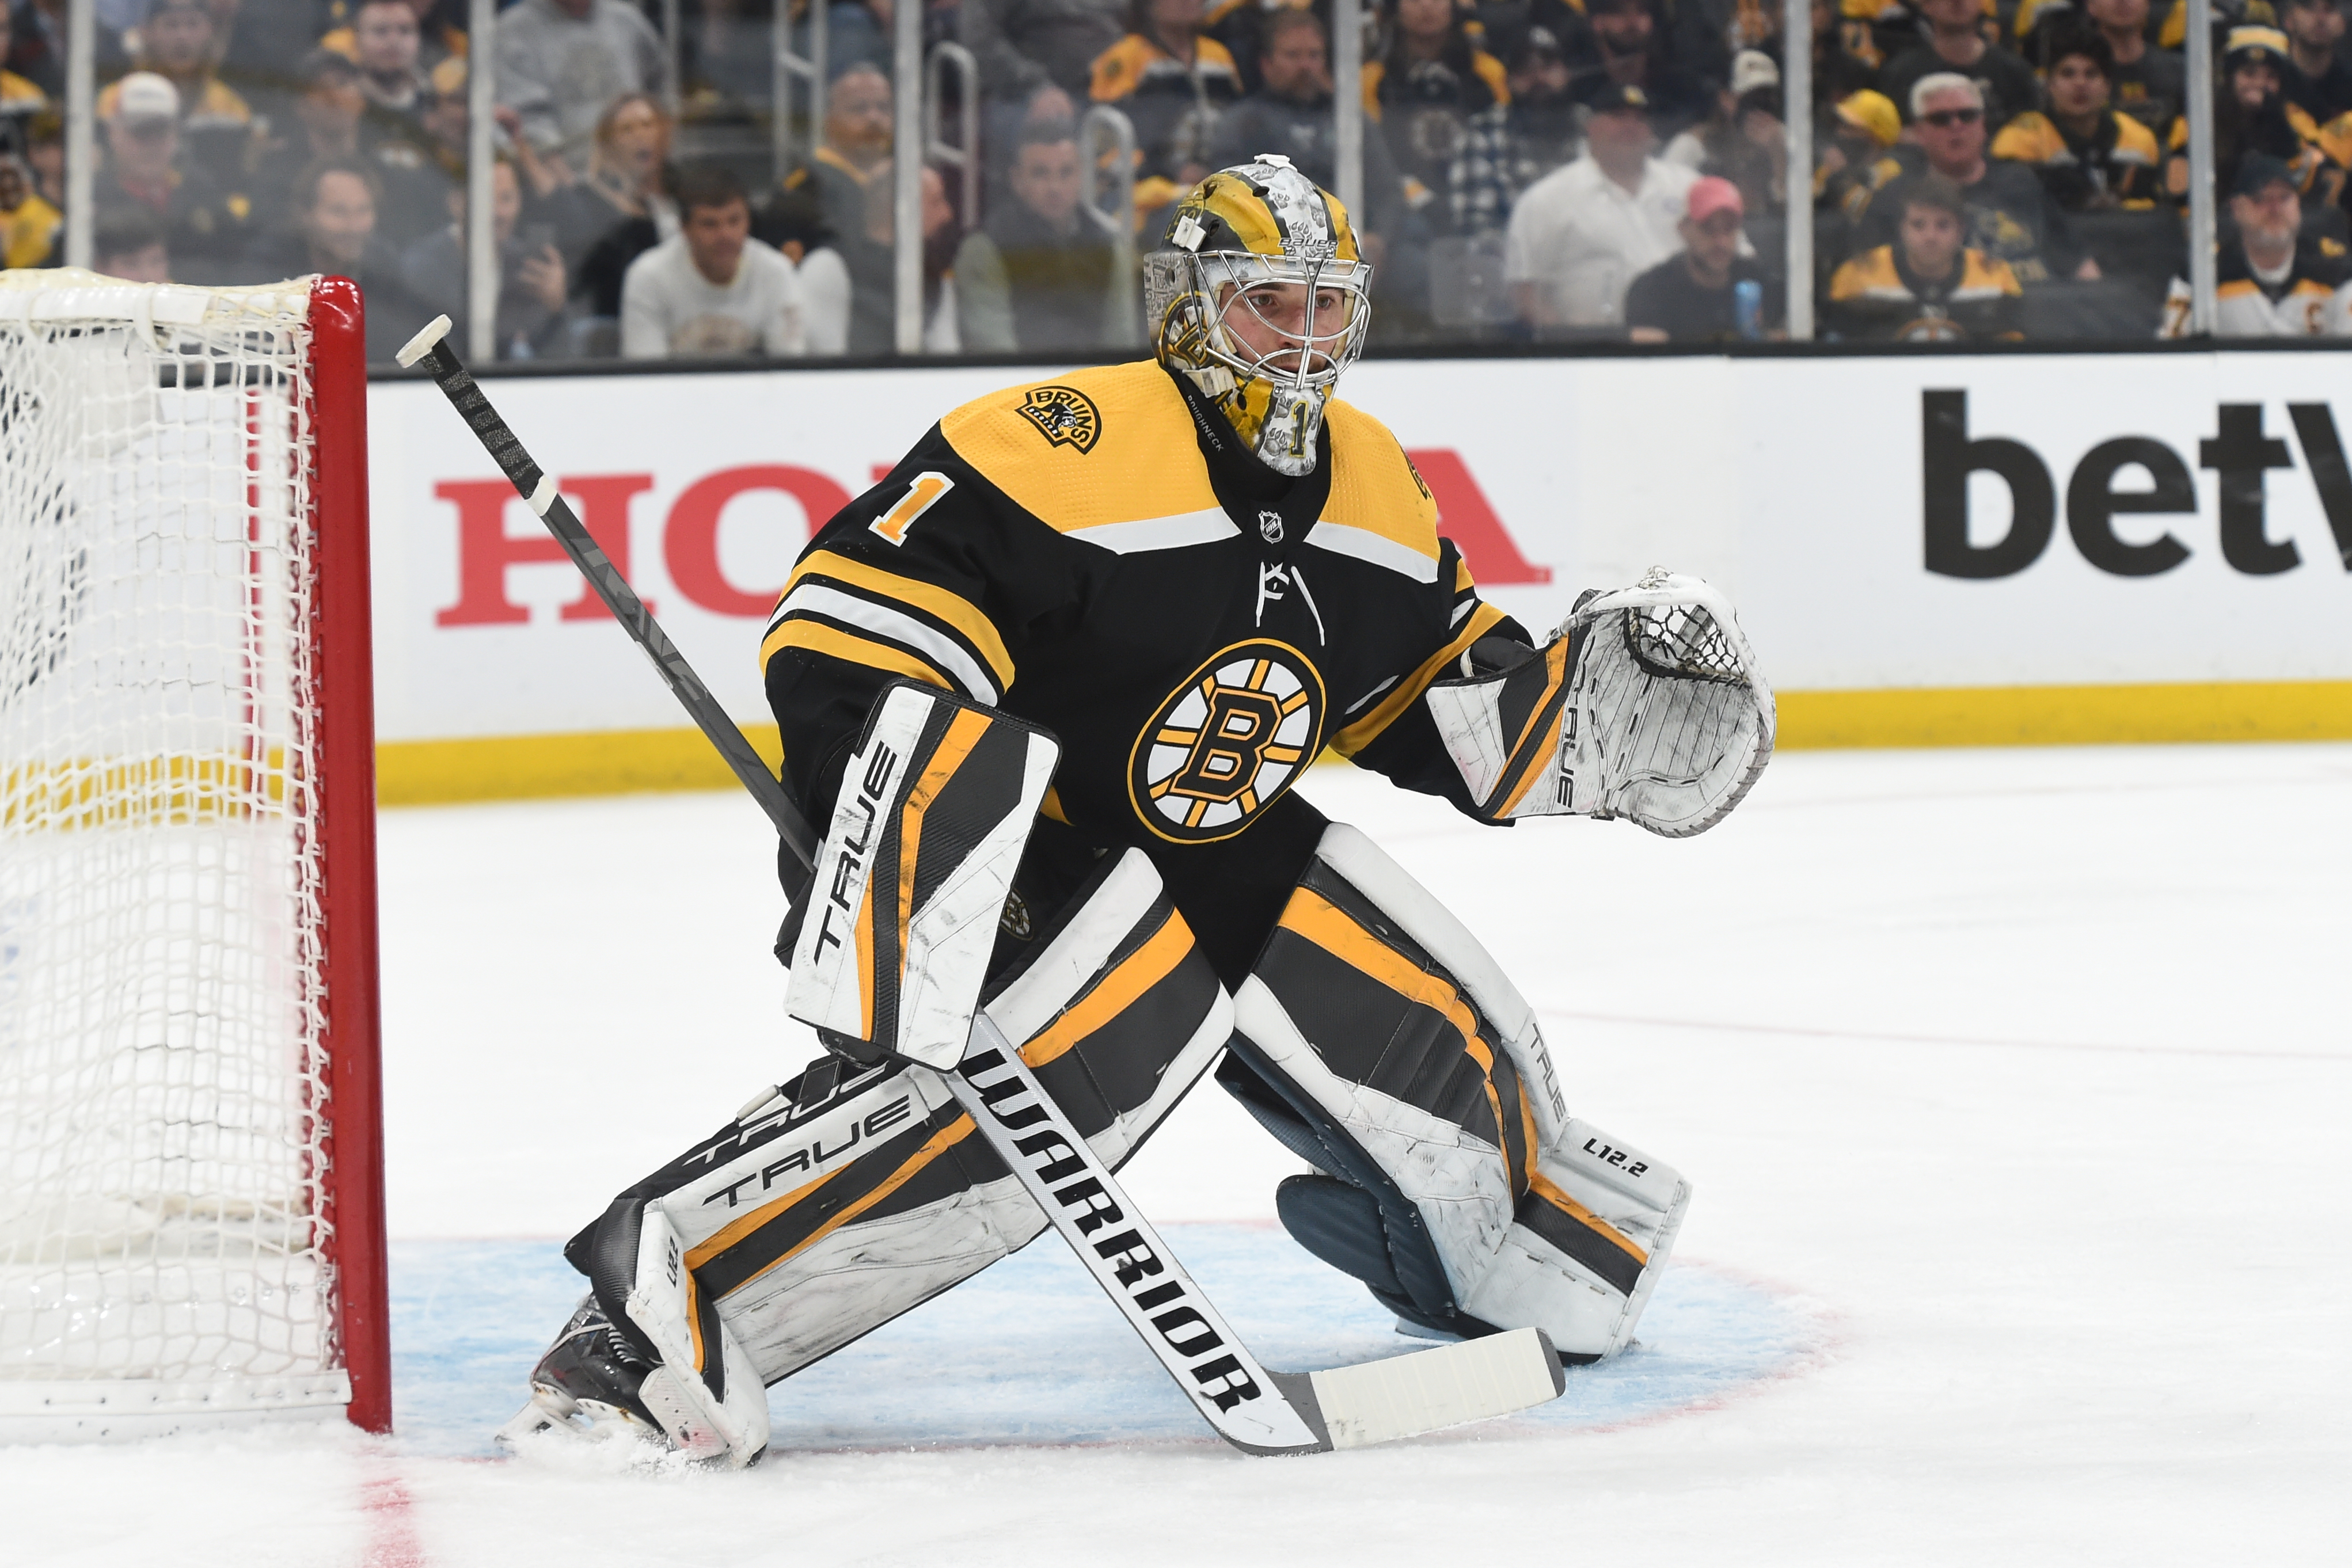 After sharpening his golf game, Bruins goalie Jeremy Swayman is excited  about fine-tuning his game at net - The Boston Globe